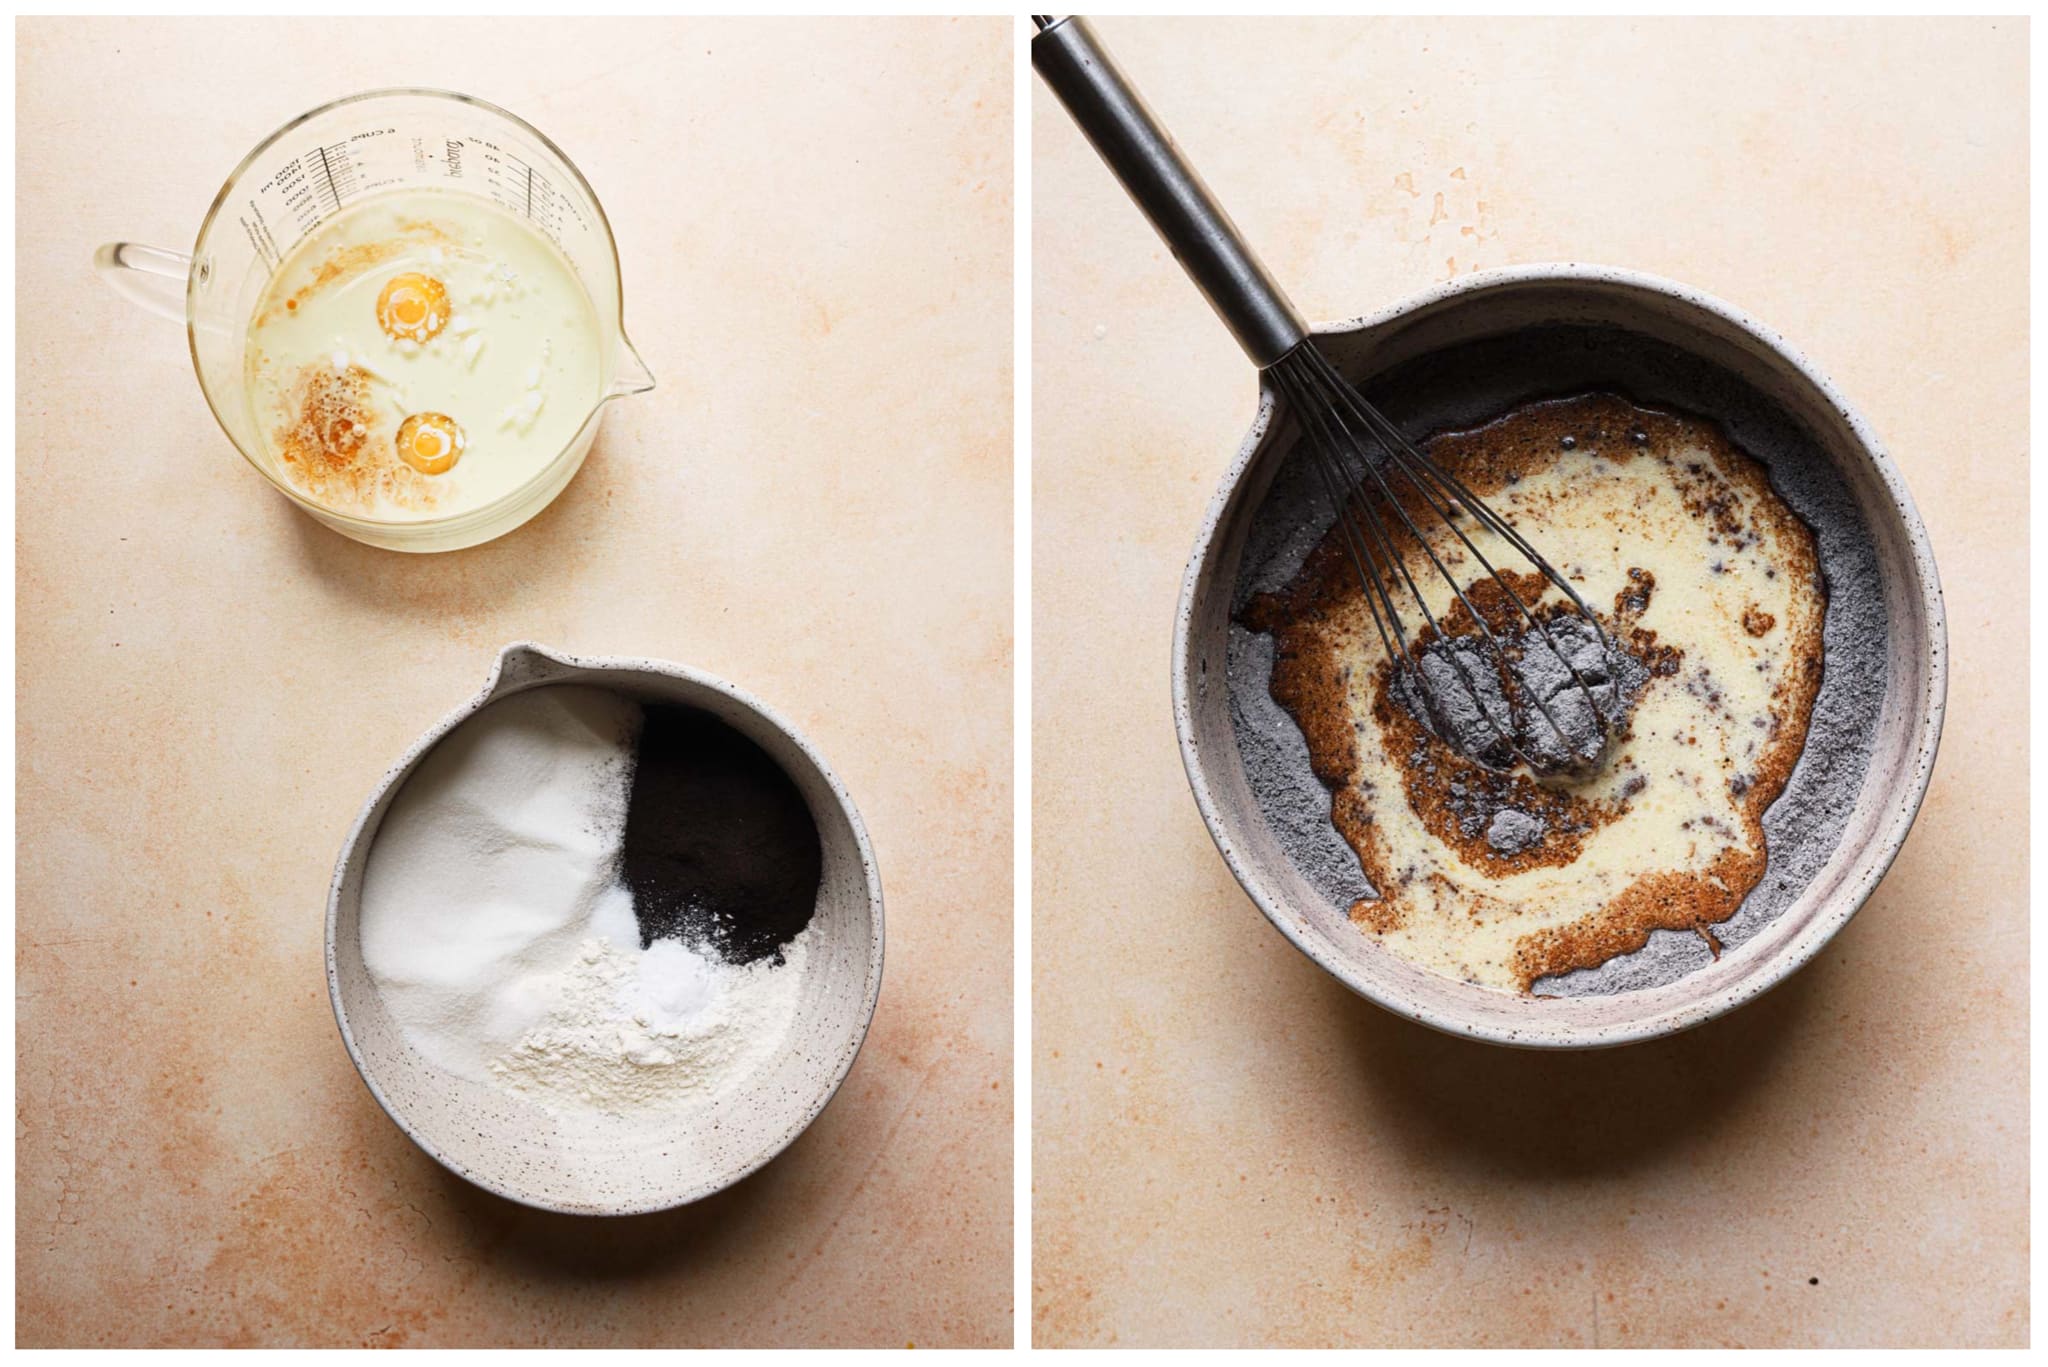 A side-by-side photo shows the steps of making cupcakes. On the left, the wet ingredients are mixed in a large measuring cup above the dry ingredients, which are mixed in a bowl. In the right photo, a chocolatey mixture is being whisked.